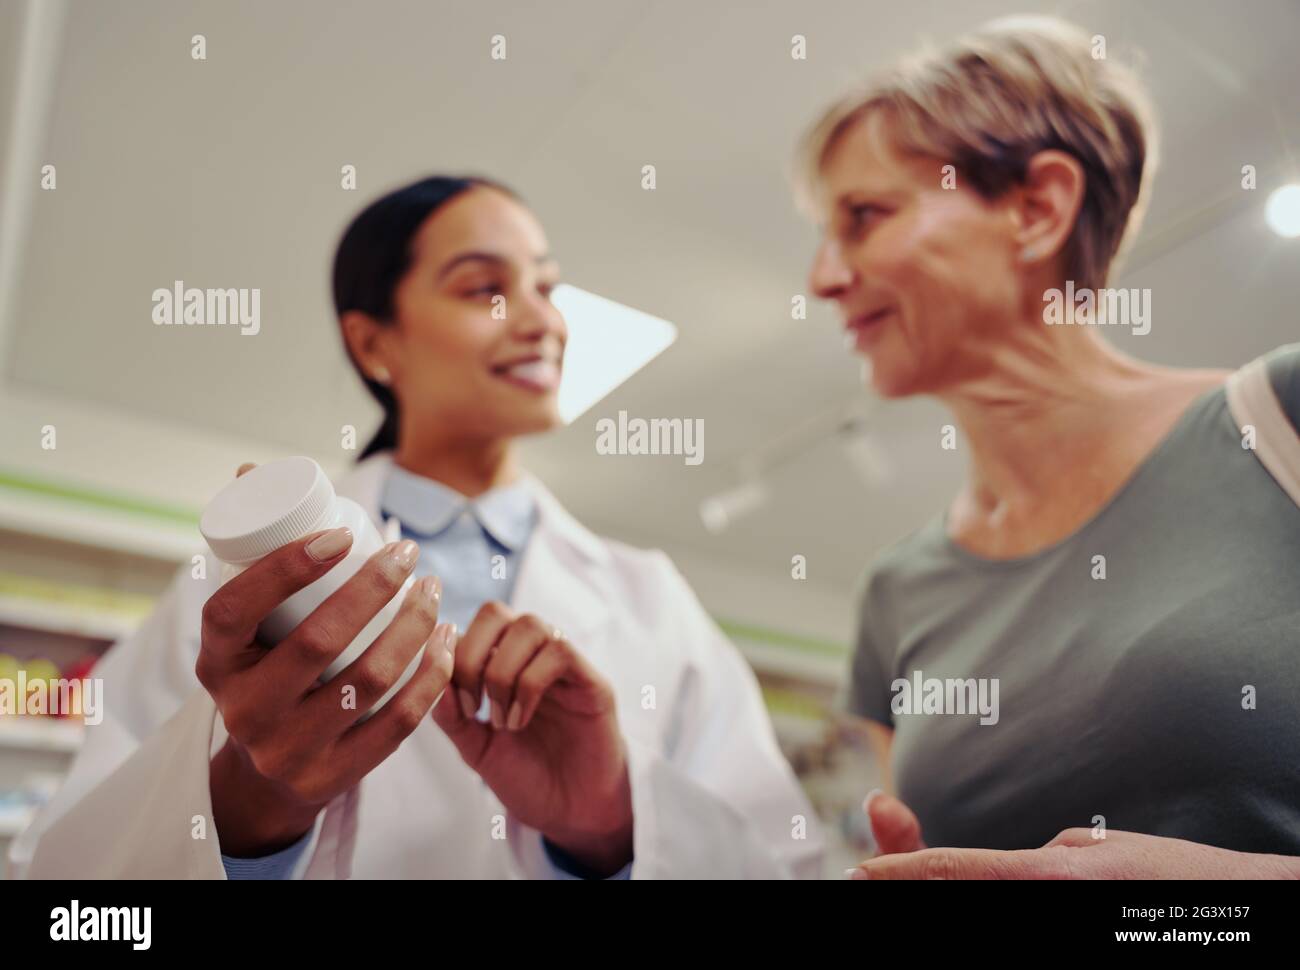 Closeup of young pharmacist hand holding and checking medicine dosage and ingredients with expiry date standing near shelf in chemist shop with senior Stock Photo